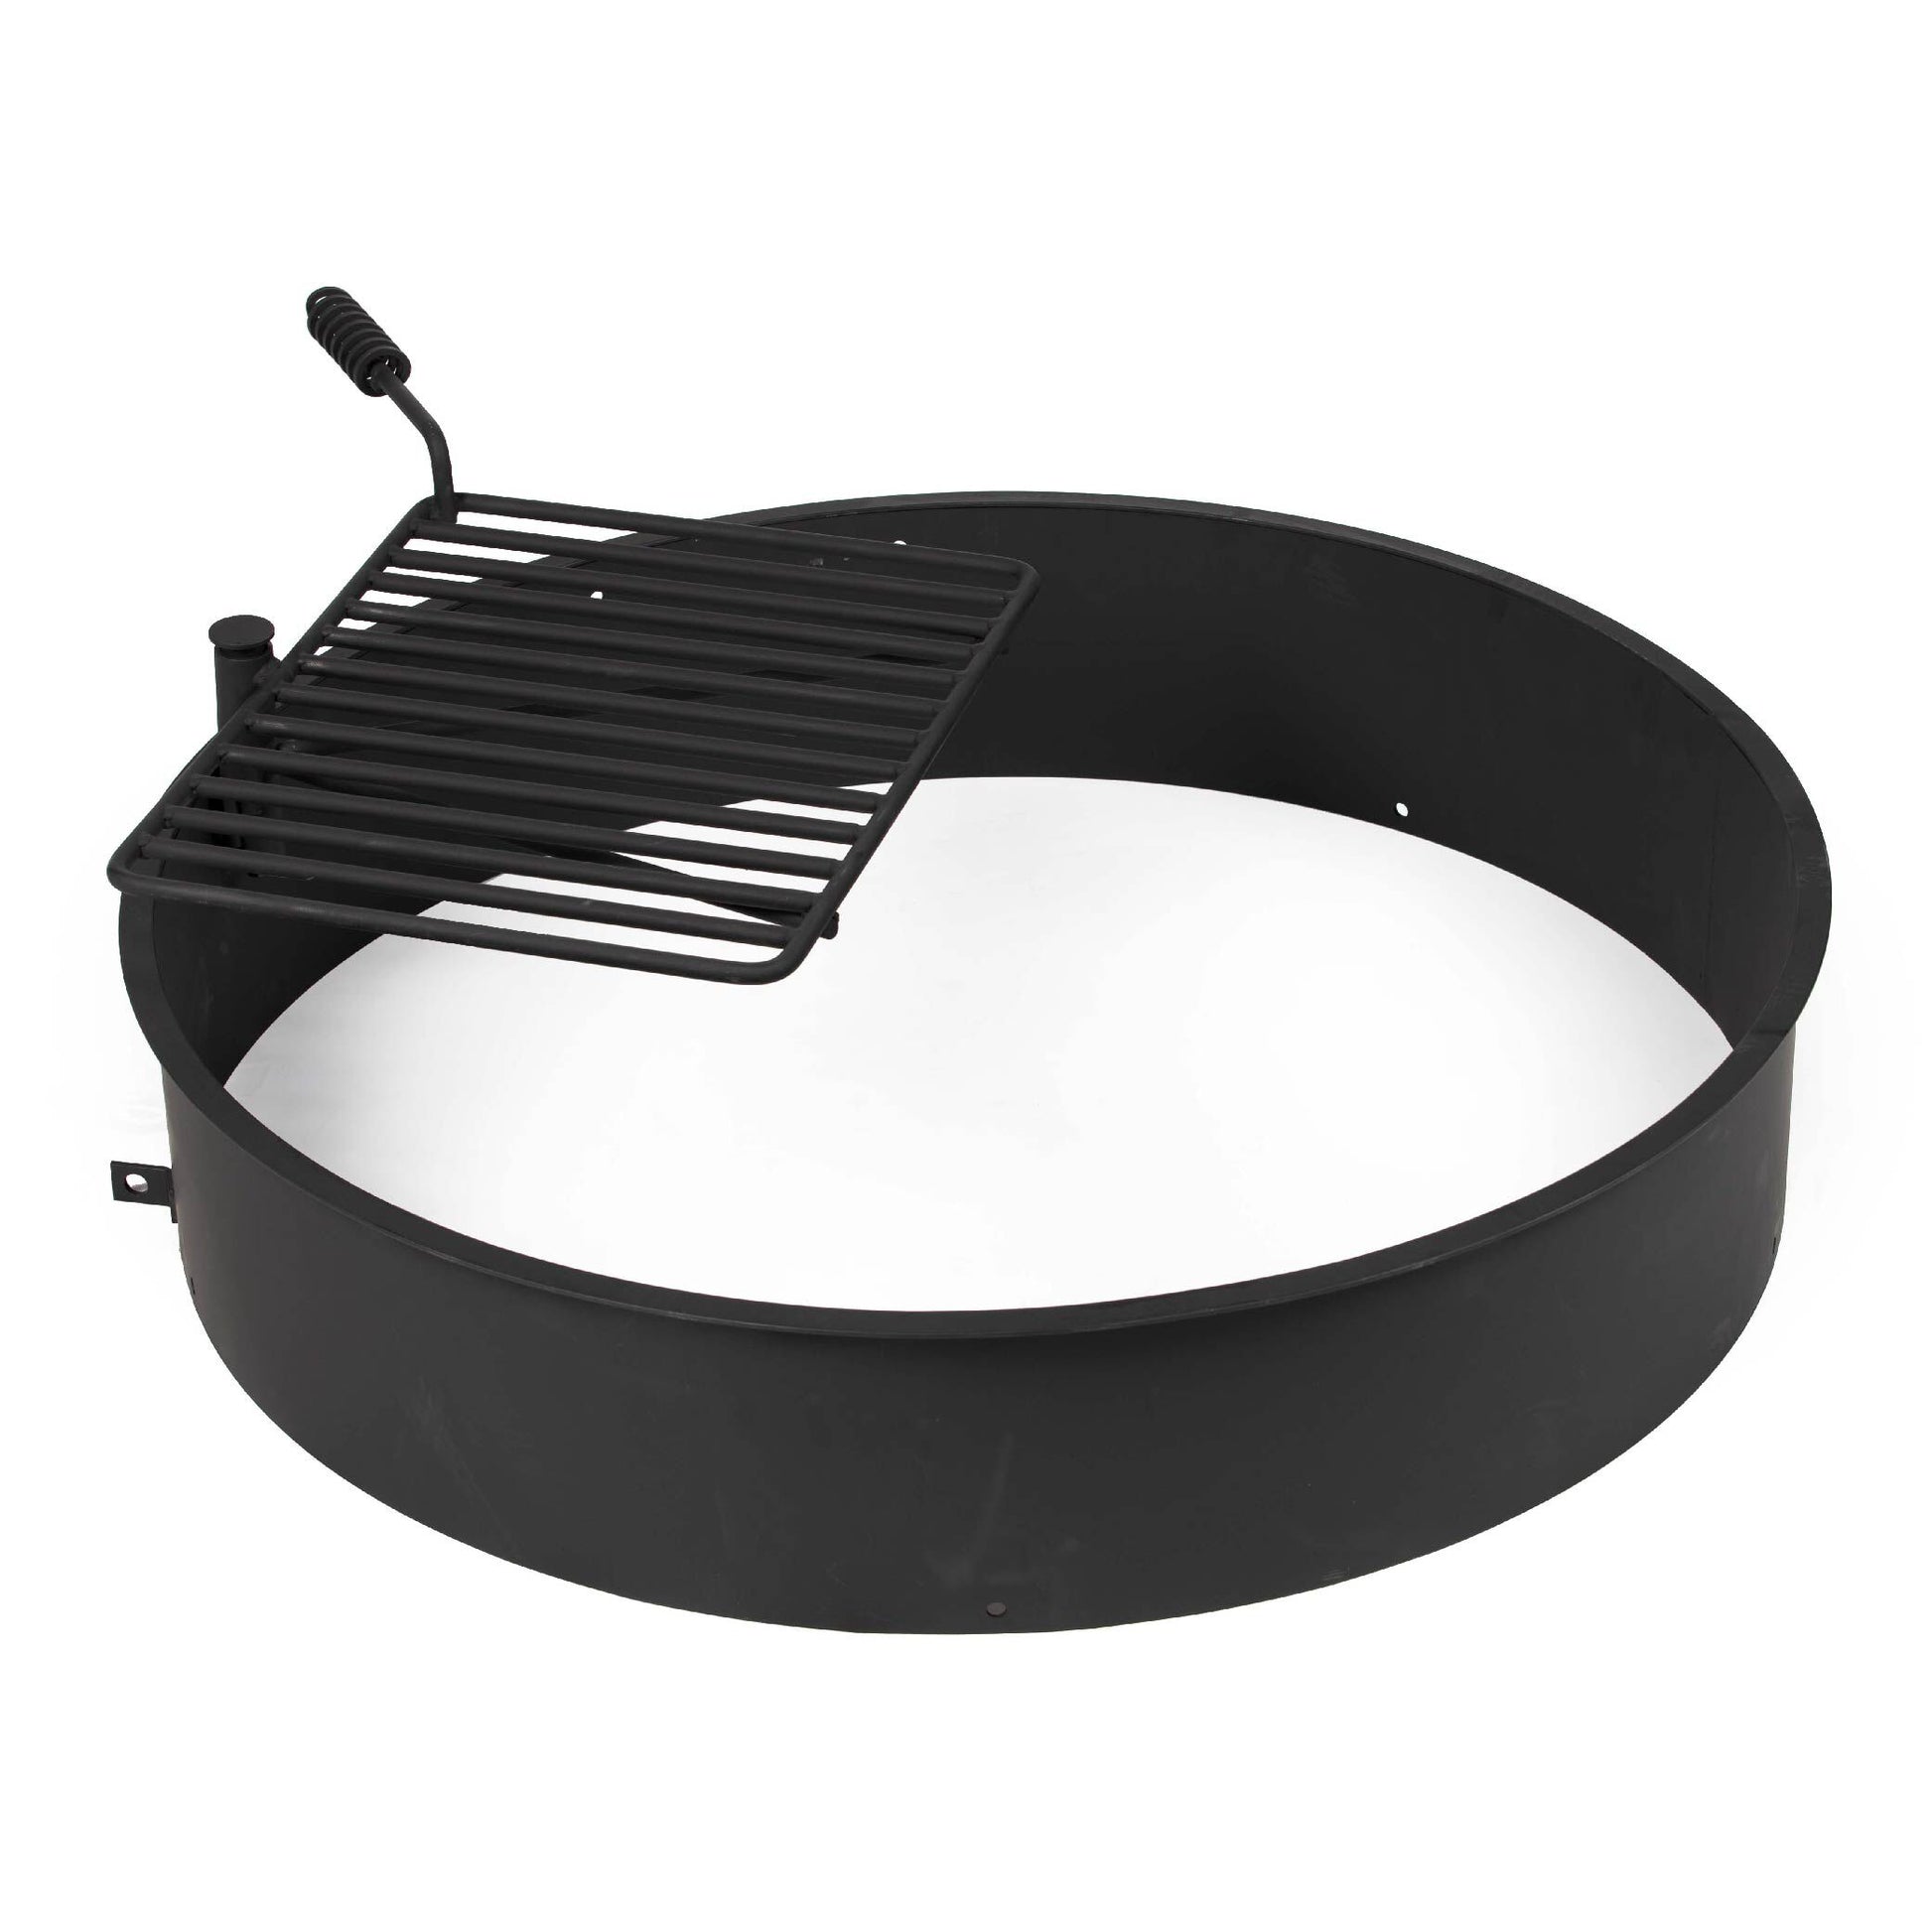 Steel Camp Fire Ring & Outdoor Cooking Grate - Fire Ring Size: 36" | 36"